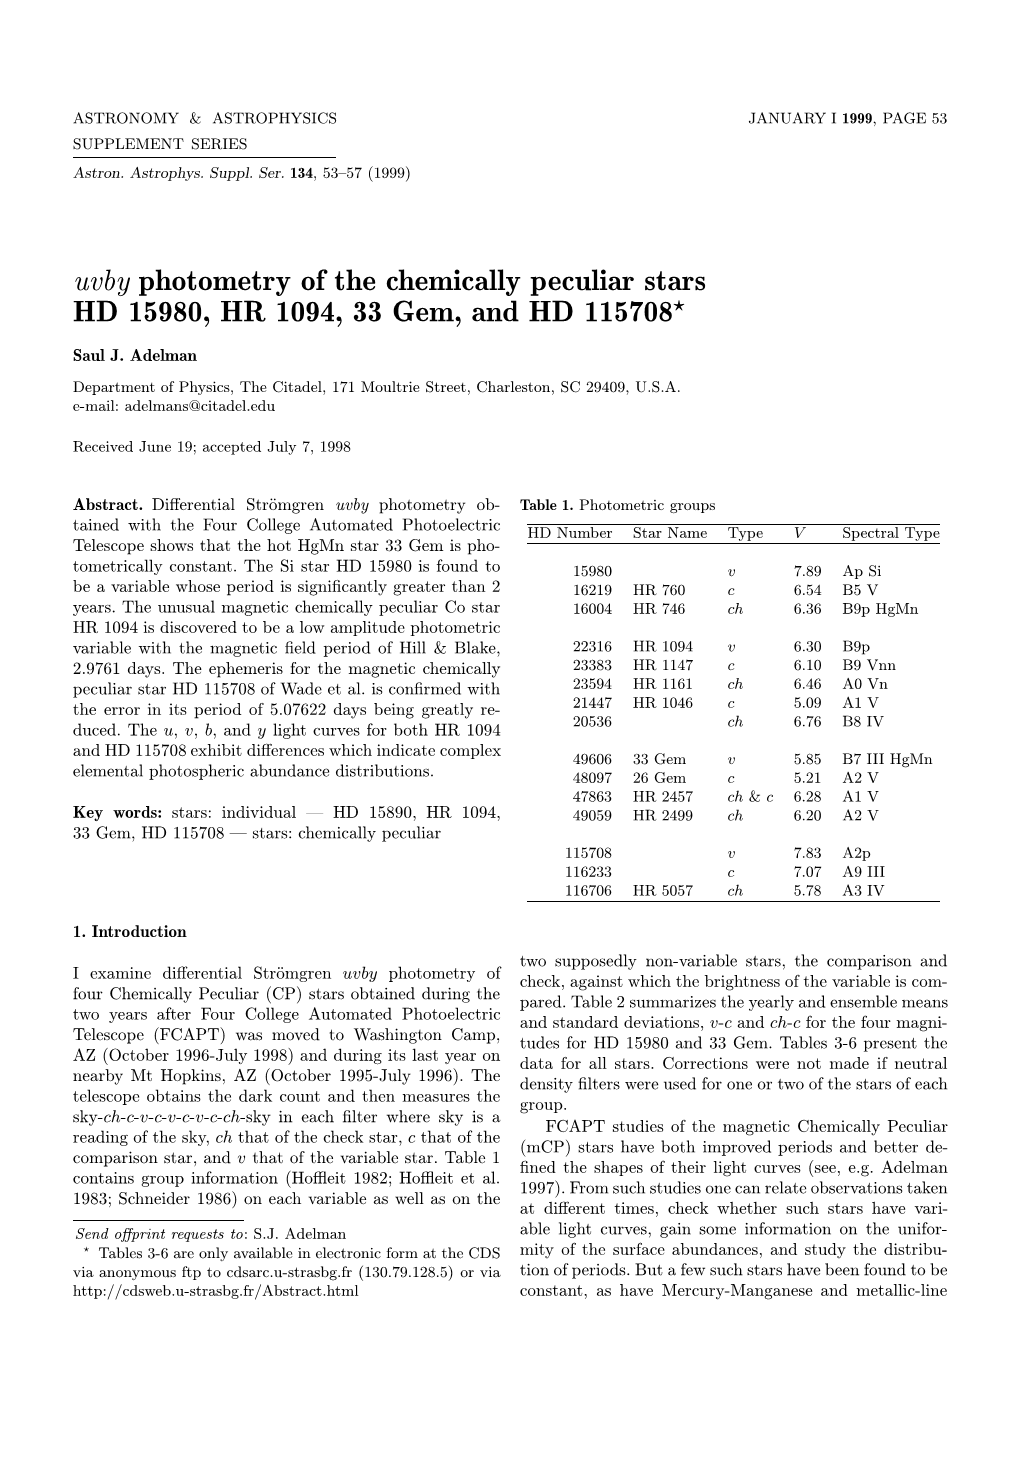 Uvby Photometry of the Chemically Peculiar Stars HD 15980, HR 1094, 33 Gem, and HD 115708?